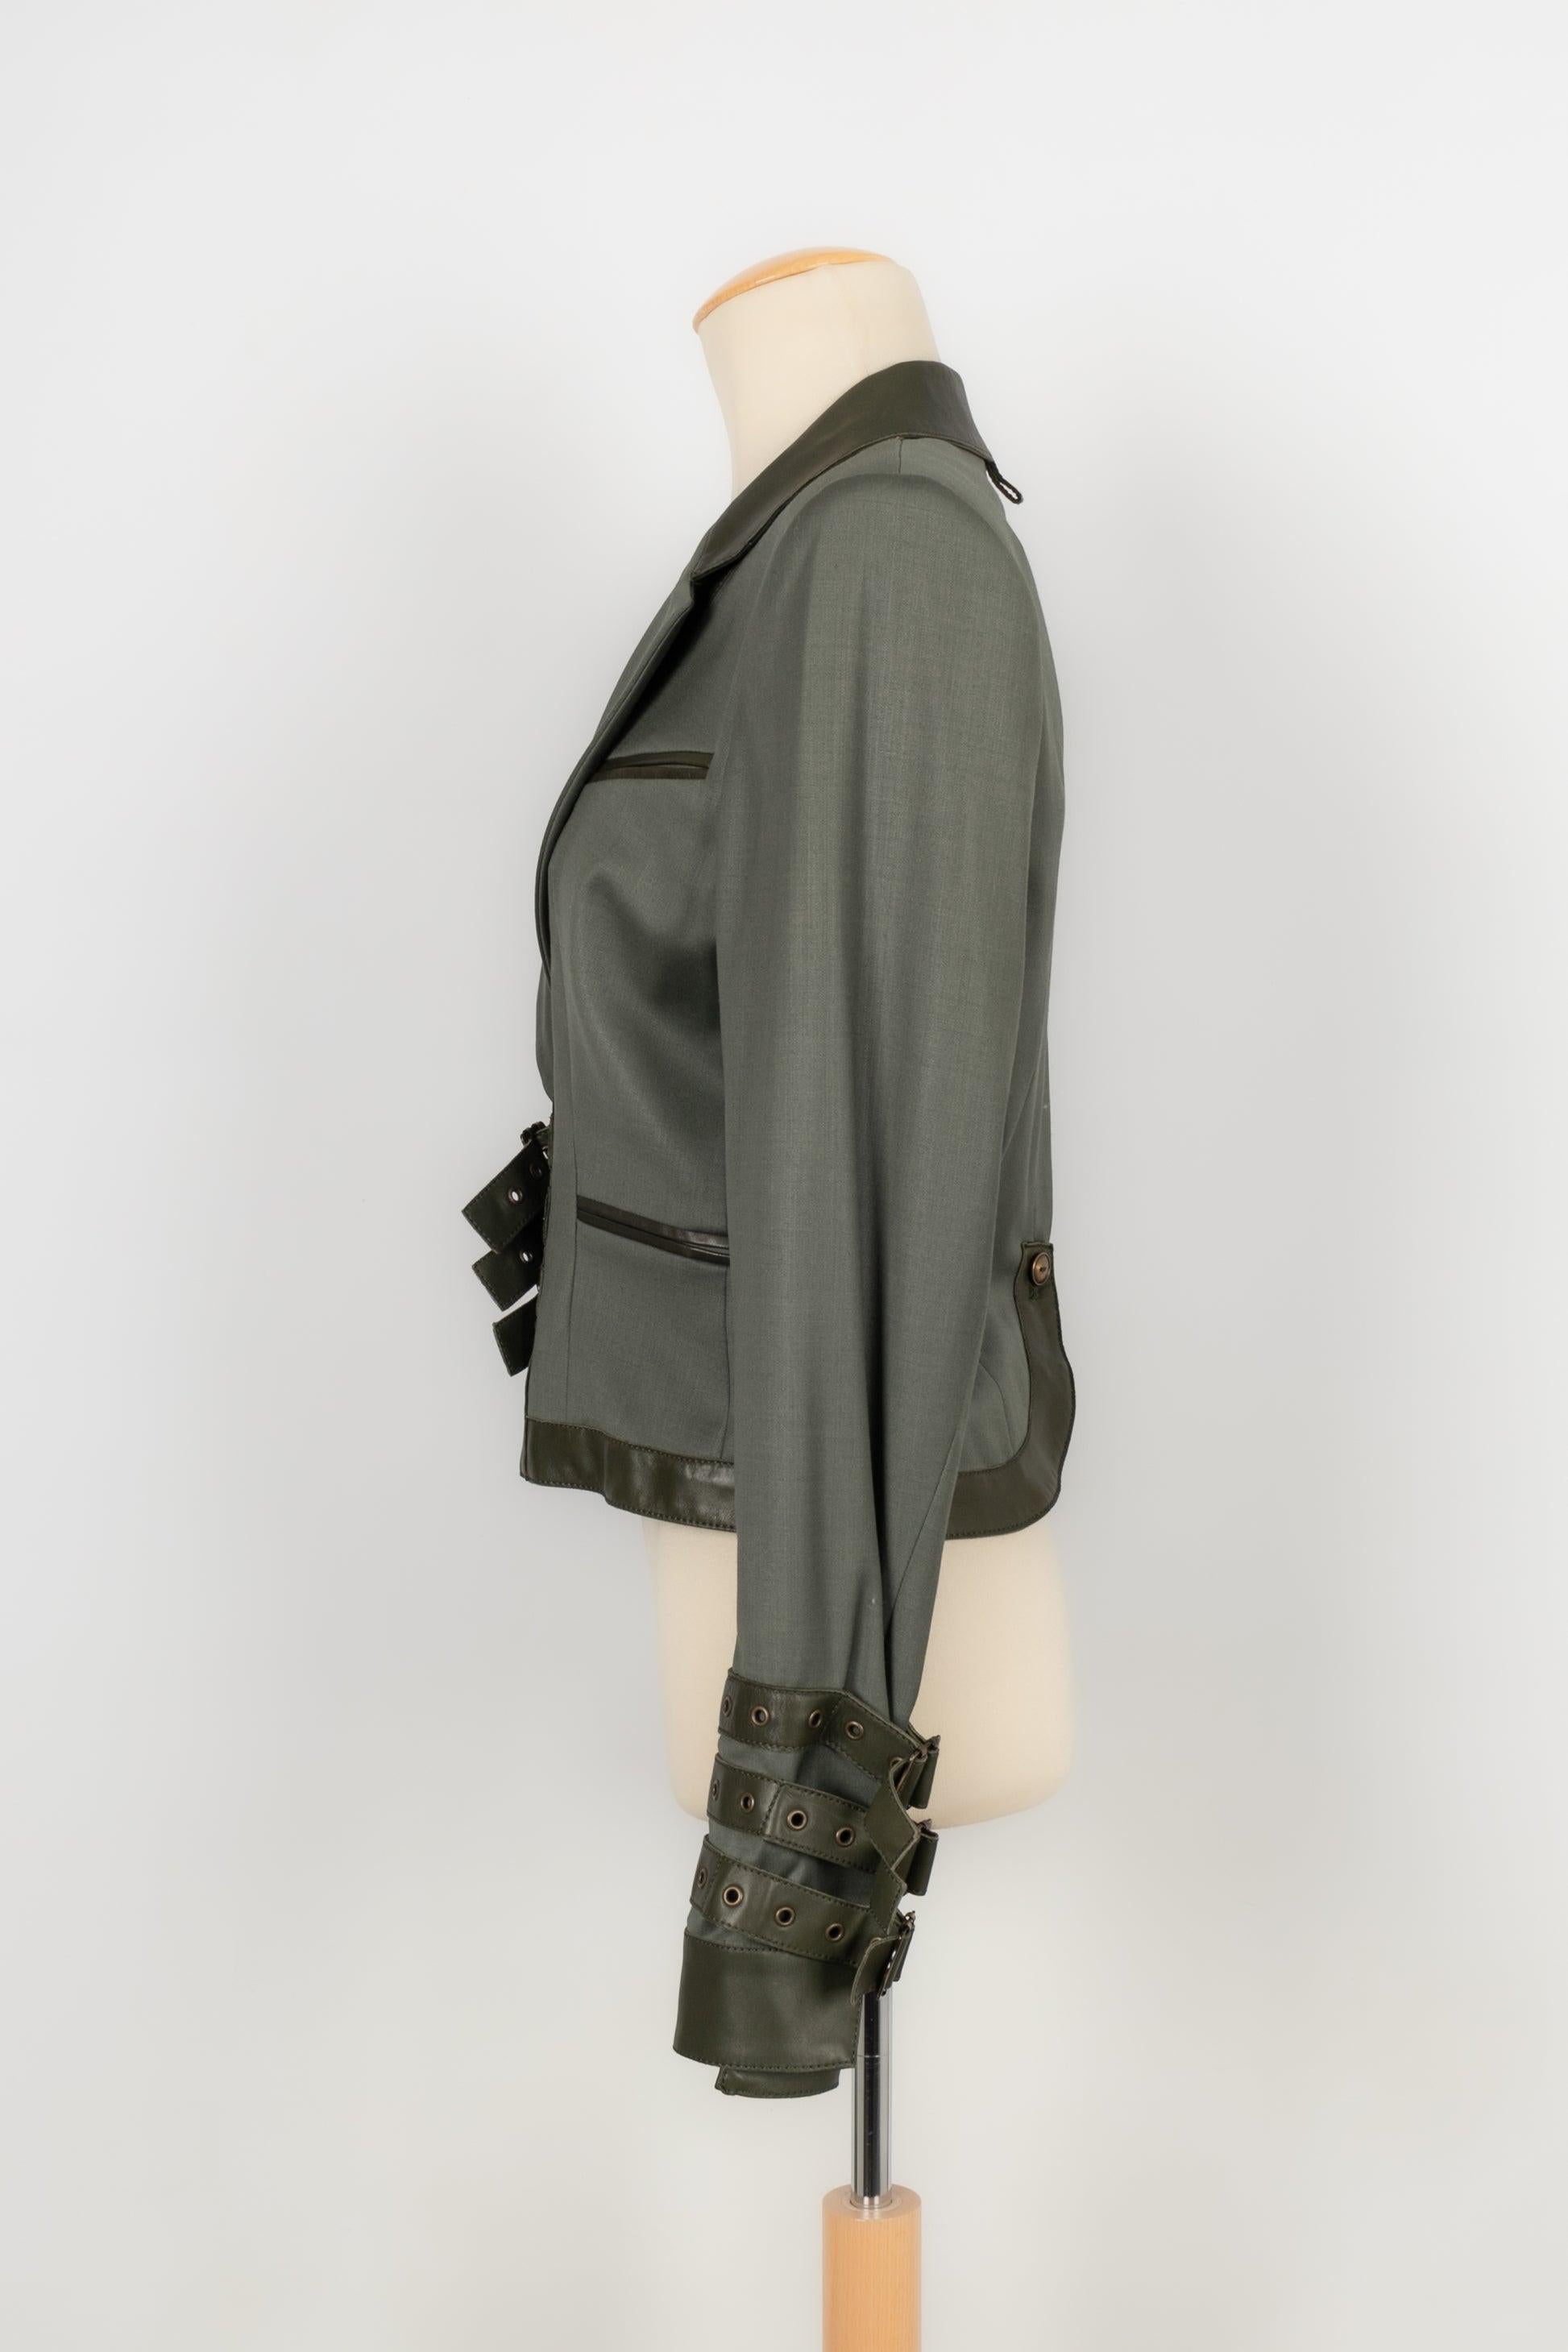 Dior - (Made in France) Olive green leather and wool jacket. The waist and the sleeve bottom are enhanced with buckles. Size 38FR. Fall-Winter 2003 Collection under the artistic direction of John Galliano.

Additional information:
Condition: Very